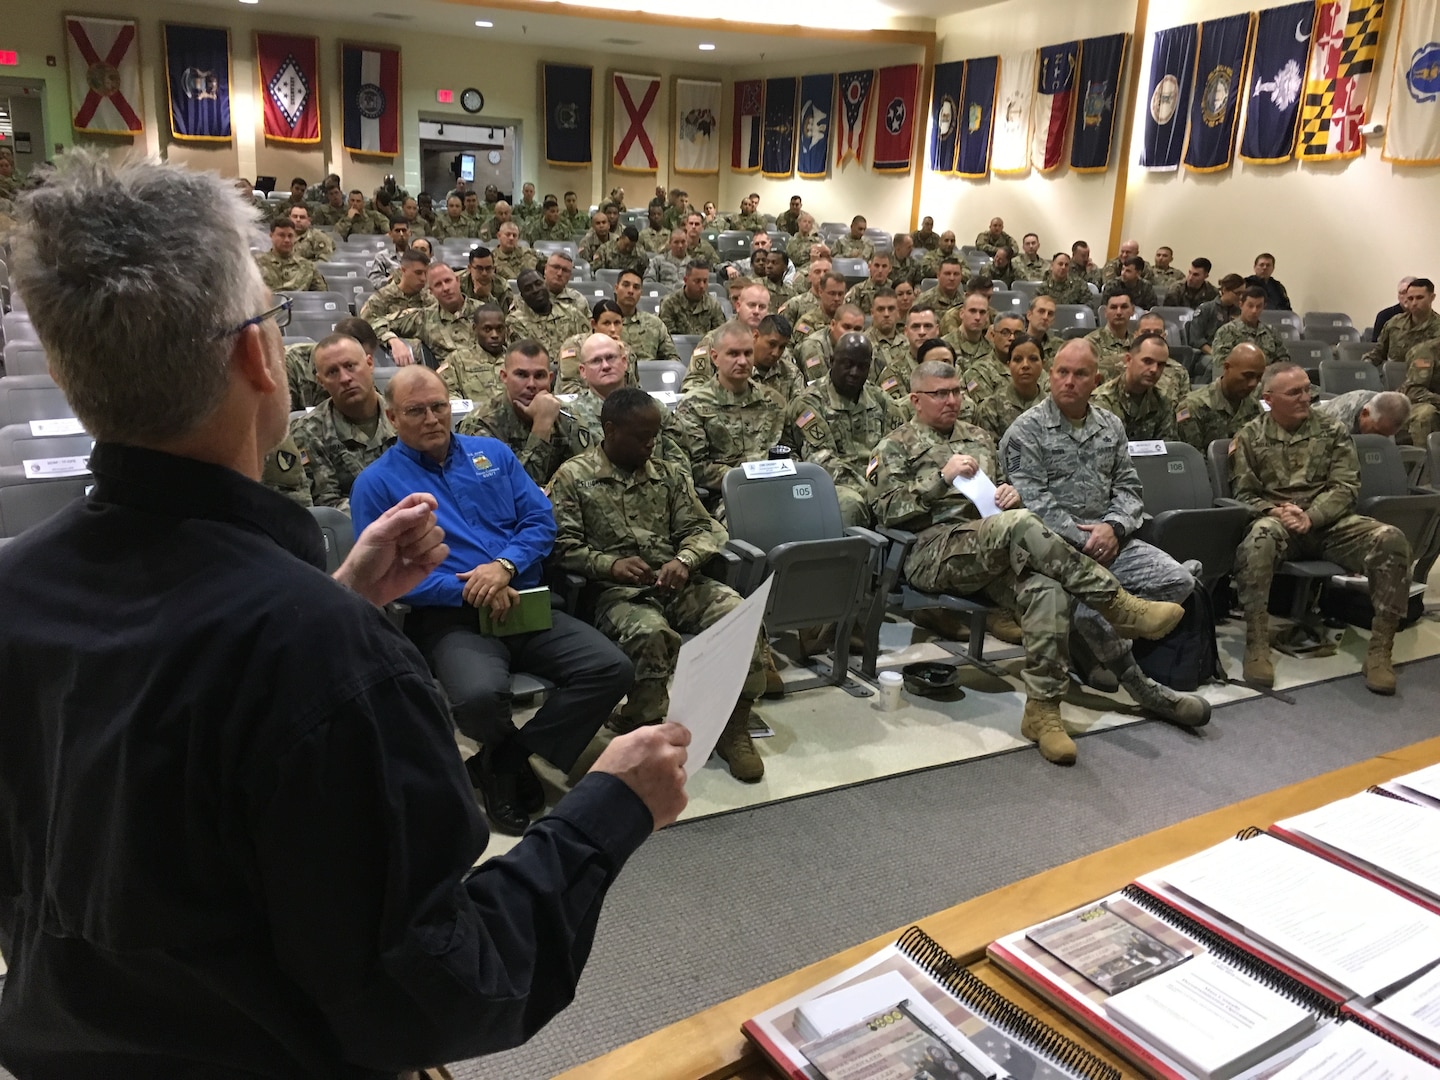 The DoD Defense CBRN Response Force (DCRF) Mission Year 2019 Mobile Training Team was conducted Nov. 27 through 29, 2018, at Fort Hood, Texas. Randy Hall, JTF-CS, explains training objectives to 150 participants. The training focused on achieving unity of effort under the National Response Framework when conducting Defense Support of Civil Authorities response operations. (DoD photo by Air Force Lt. Col. Karen Roganov, director of JTF-CS Public Affairs/ released)